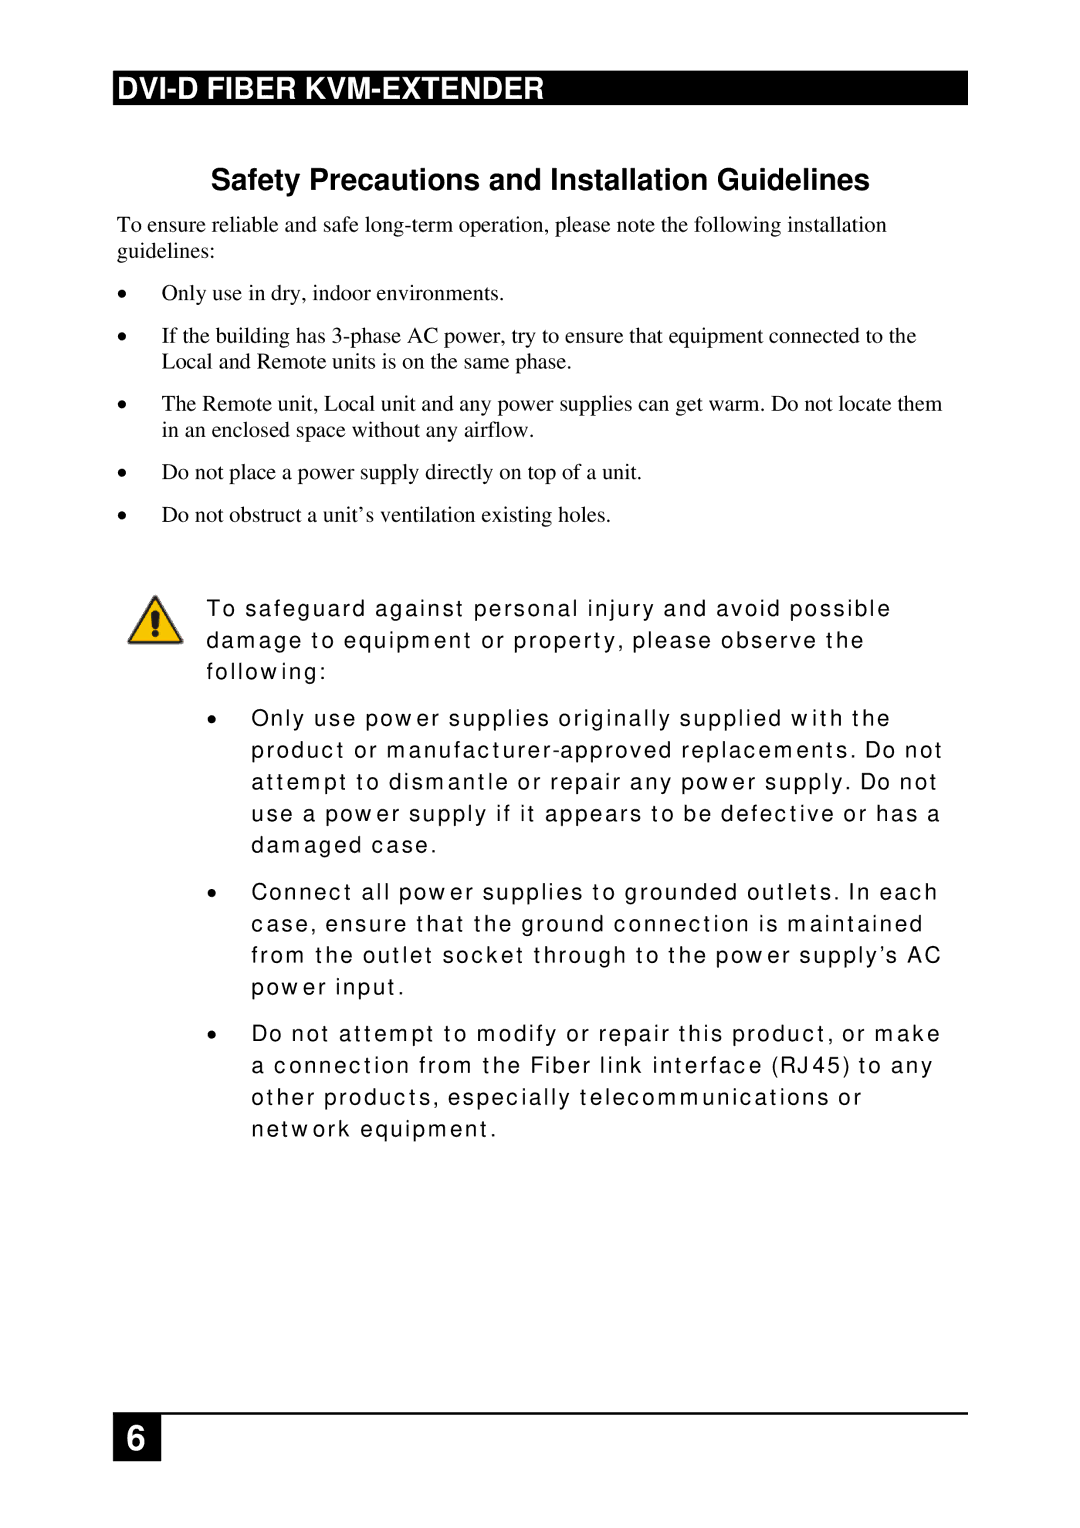 Black Box ACS2009A-R2-xx, ACS4222A-R2-xx, ACS2228A-R2-xx ACS4001A-R2-xx manual Safety Precautions and Installation Guidelines 